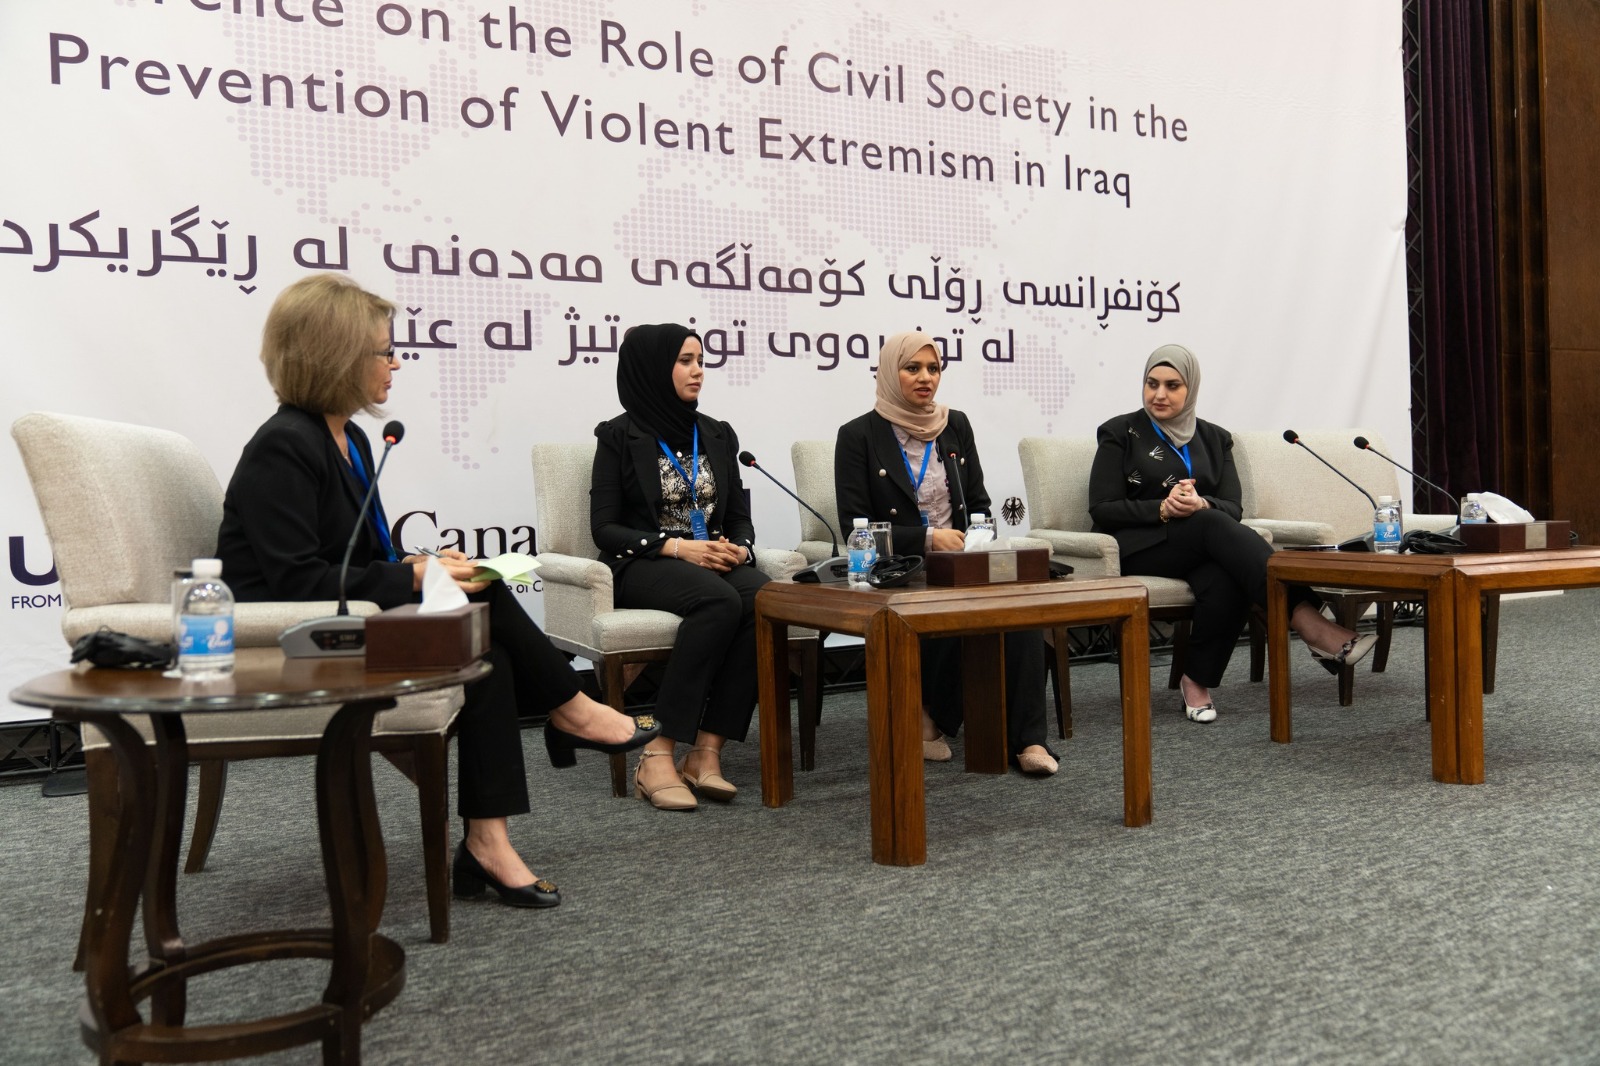 Civil Society in Preventing Violent Extremism in Iraq Conference